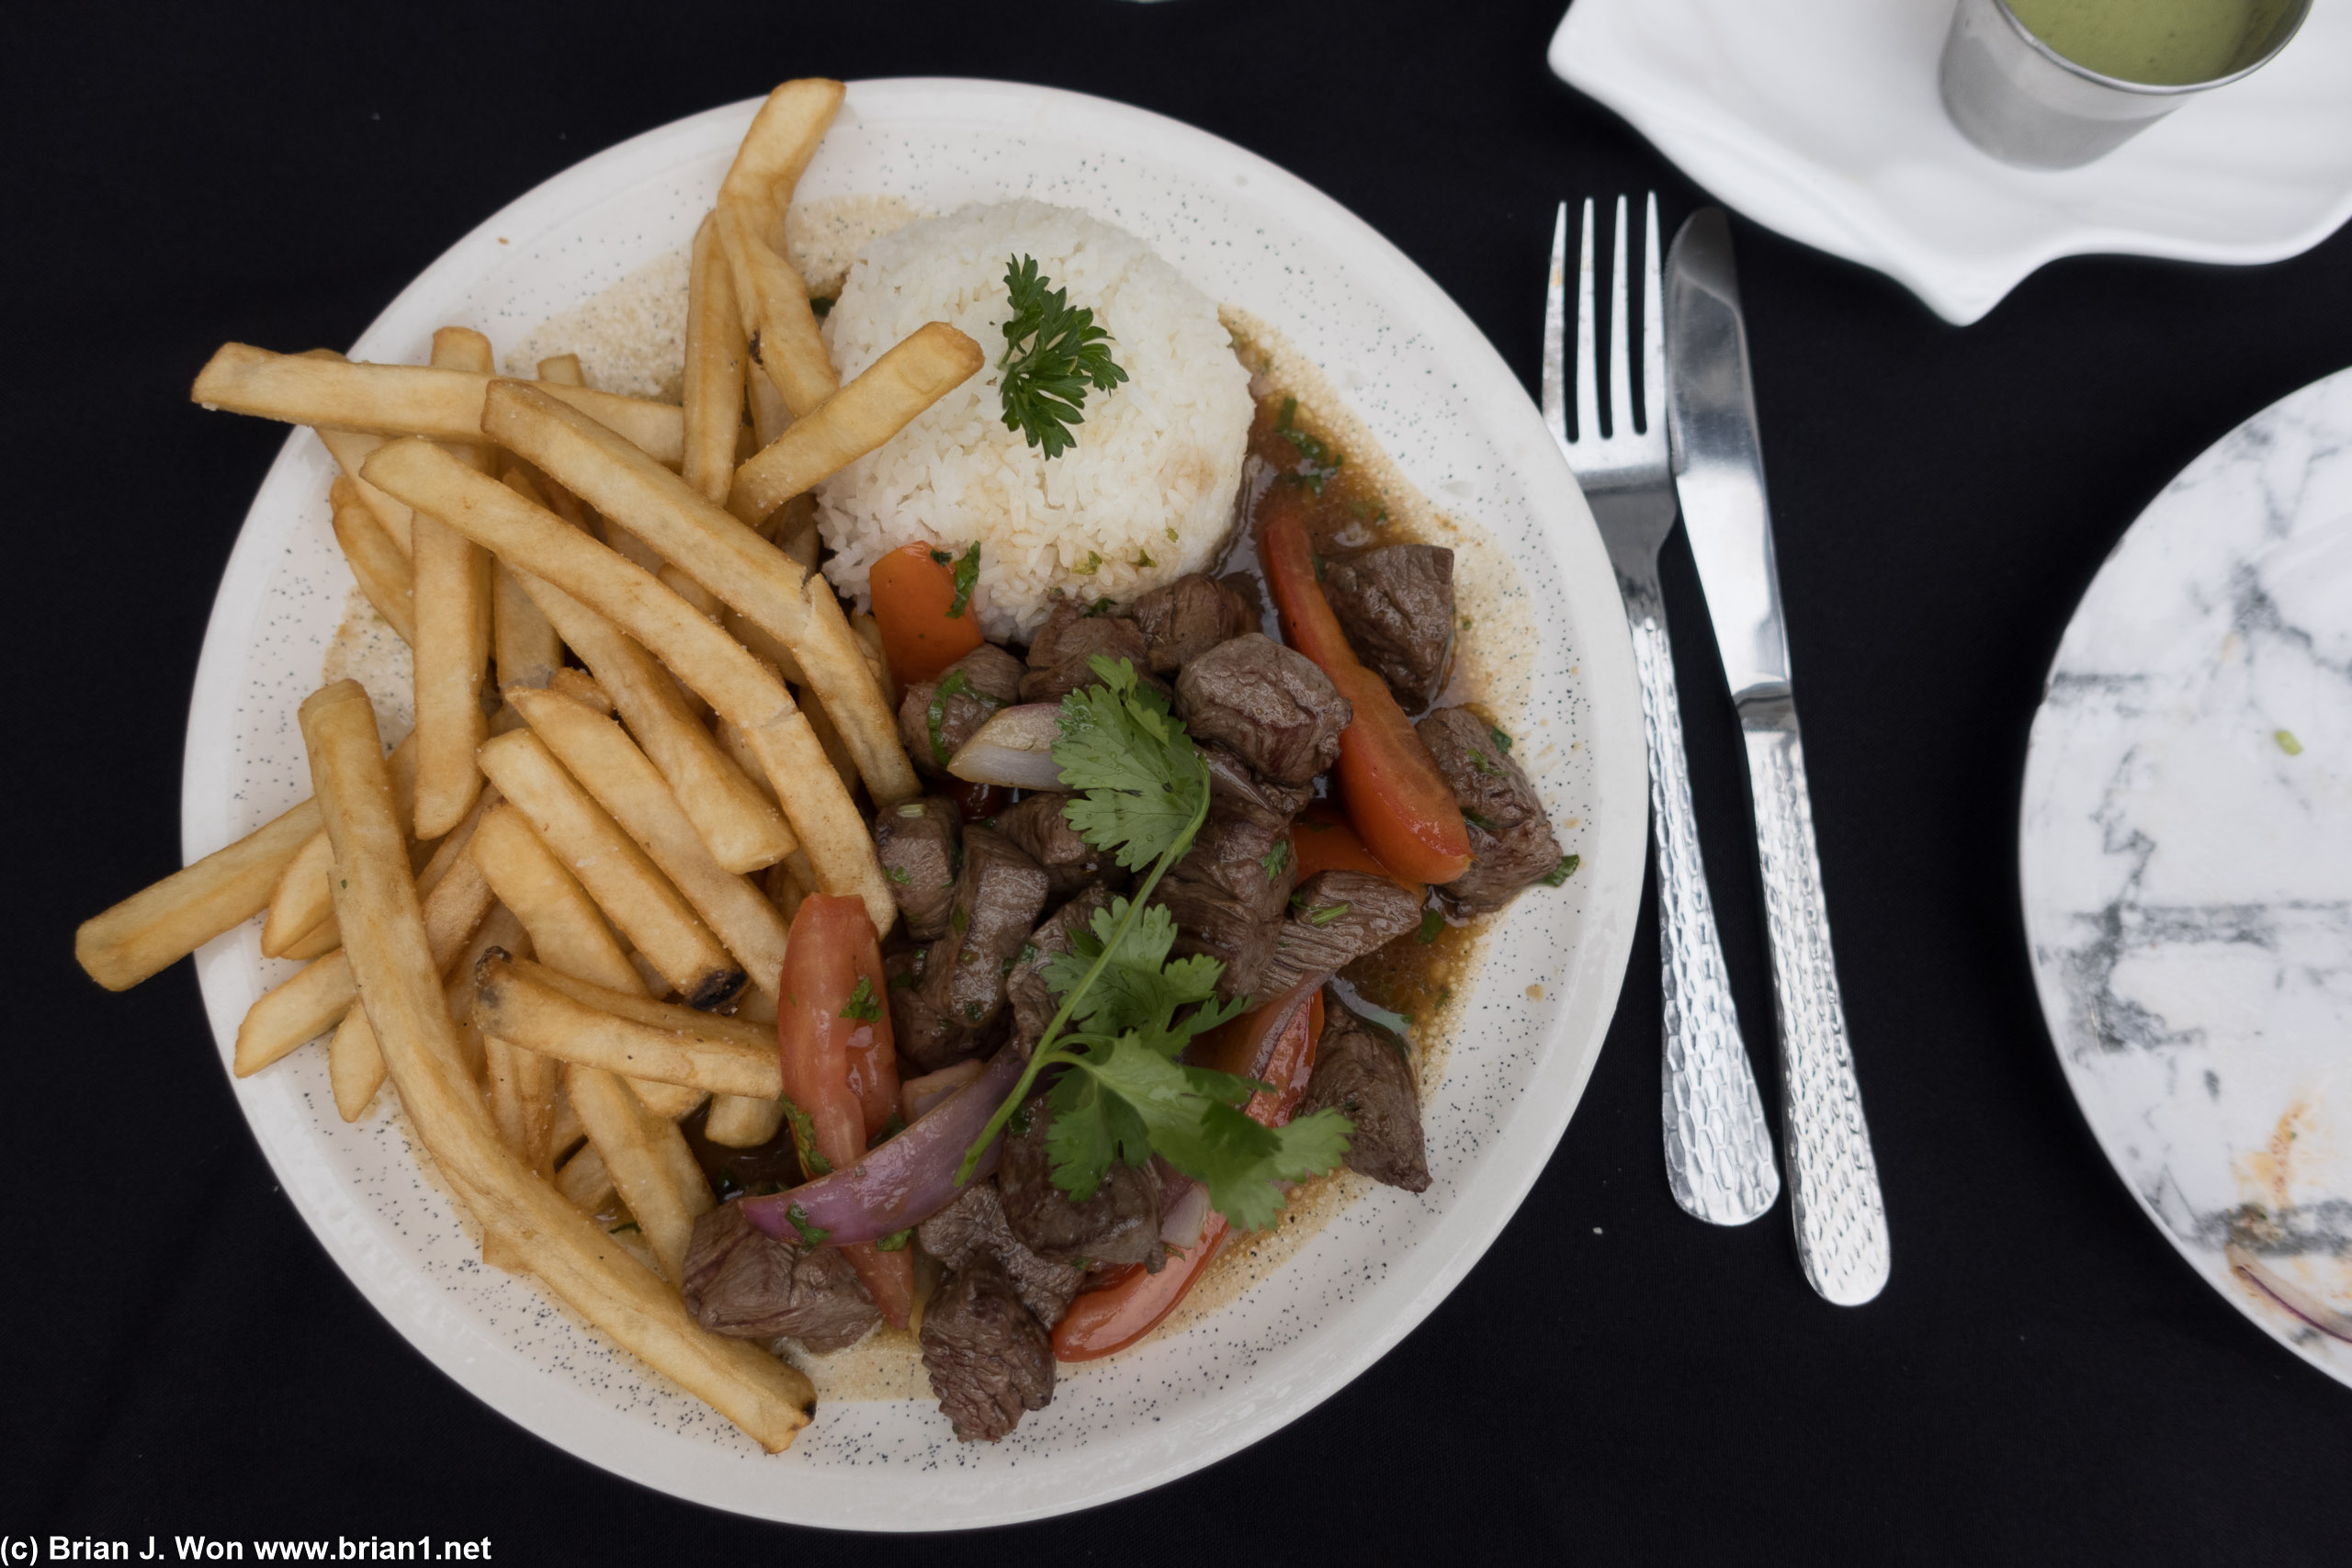 Lomo saltado was okay, everything about it but the sauce was good-- sauce was too salty.